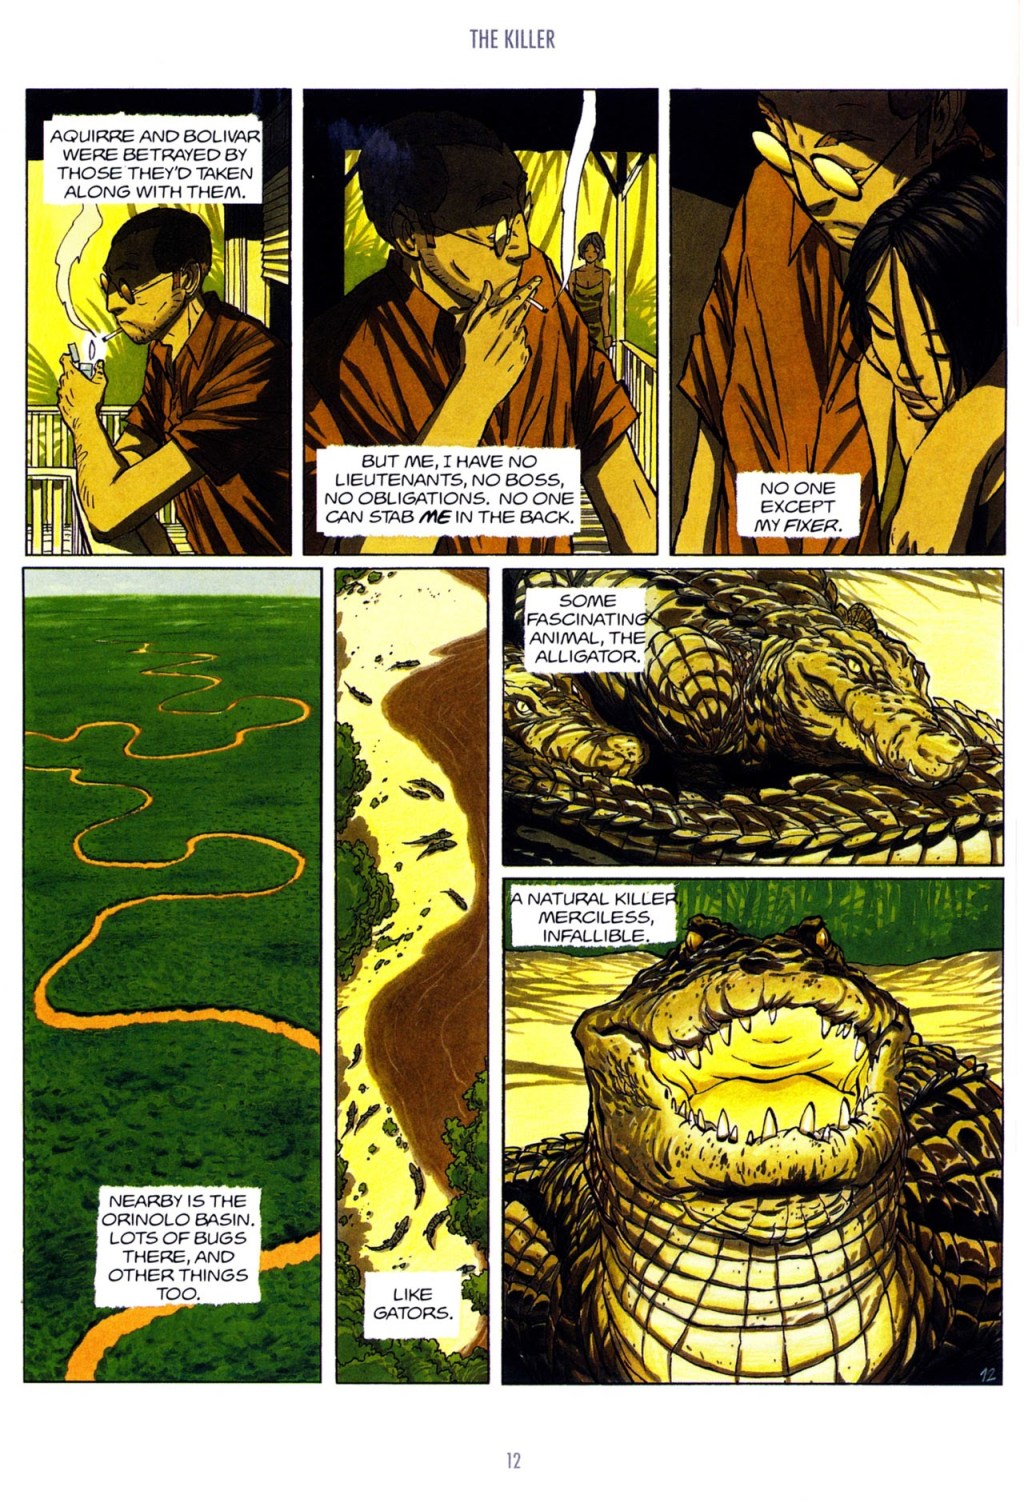 The Killer Vol. 1 Issue #3 "Vicious Cycle, Part One" (2007), Archaia. Words by Matz, art by Luc Jacamon